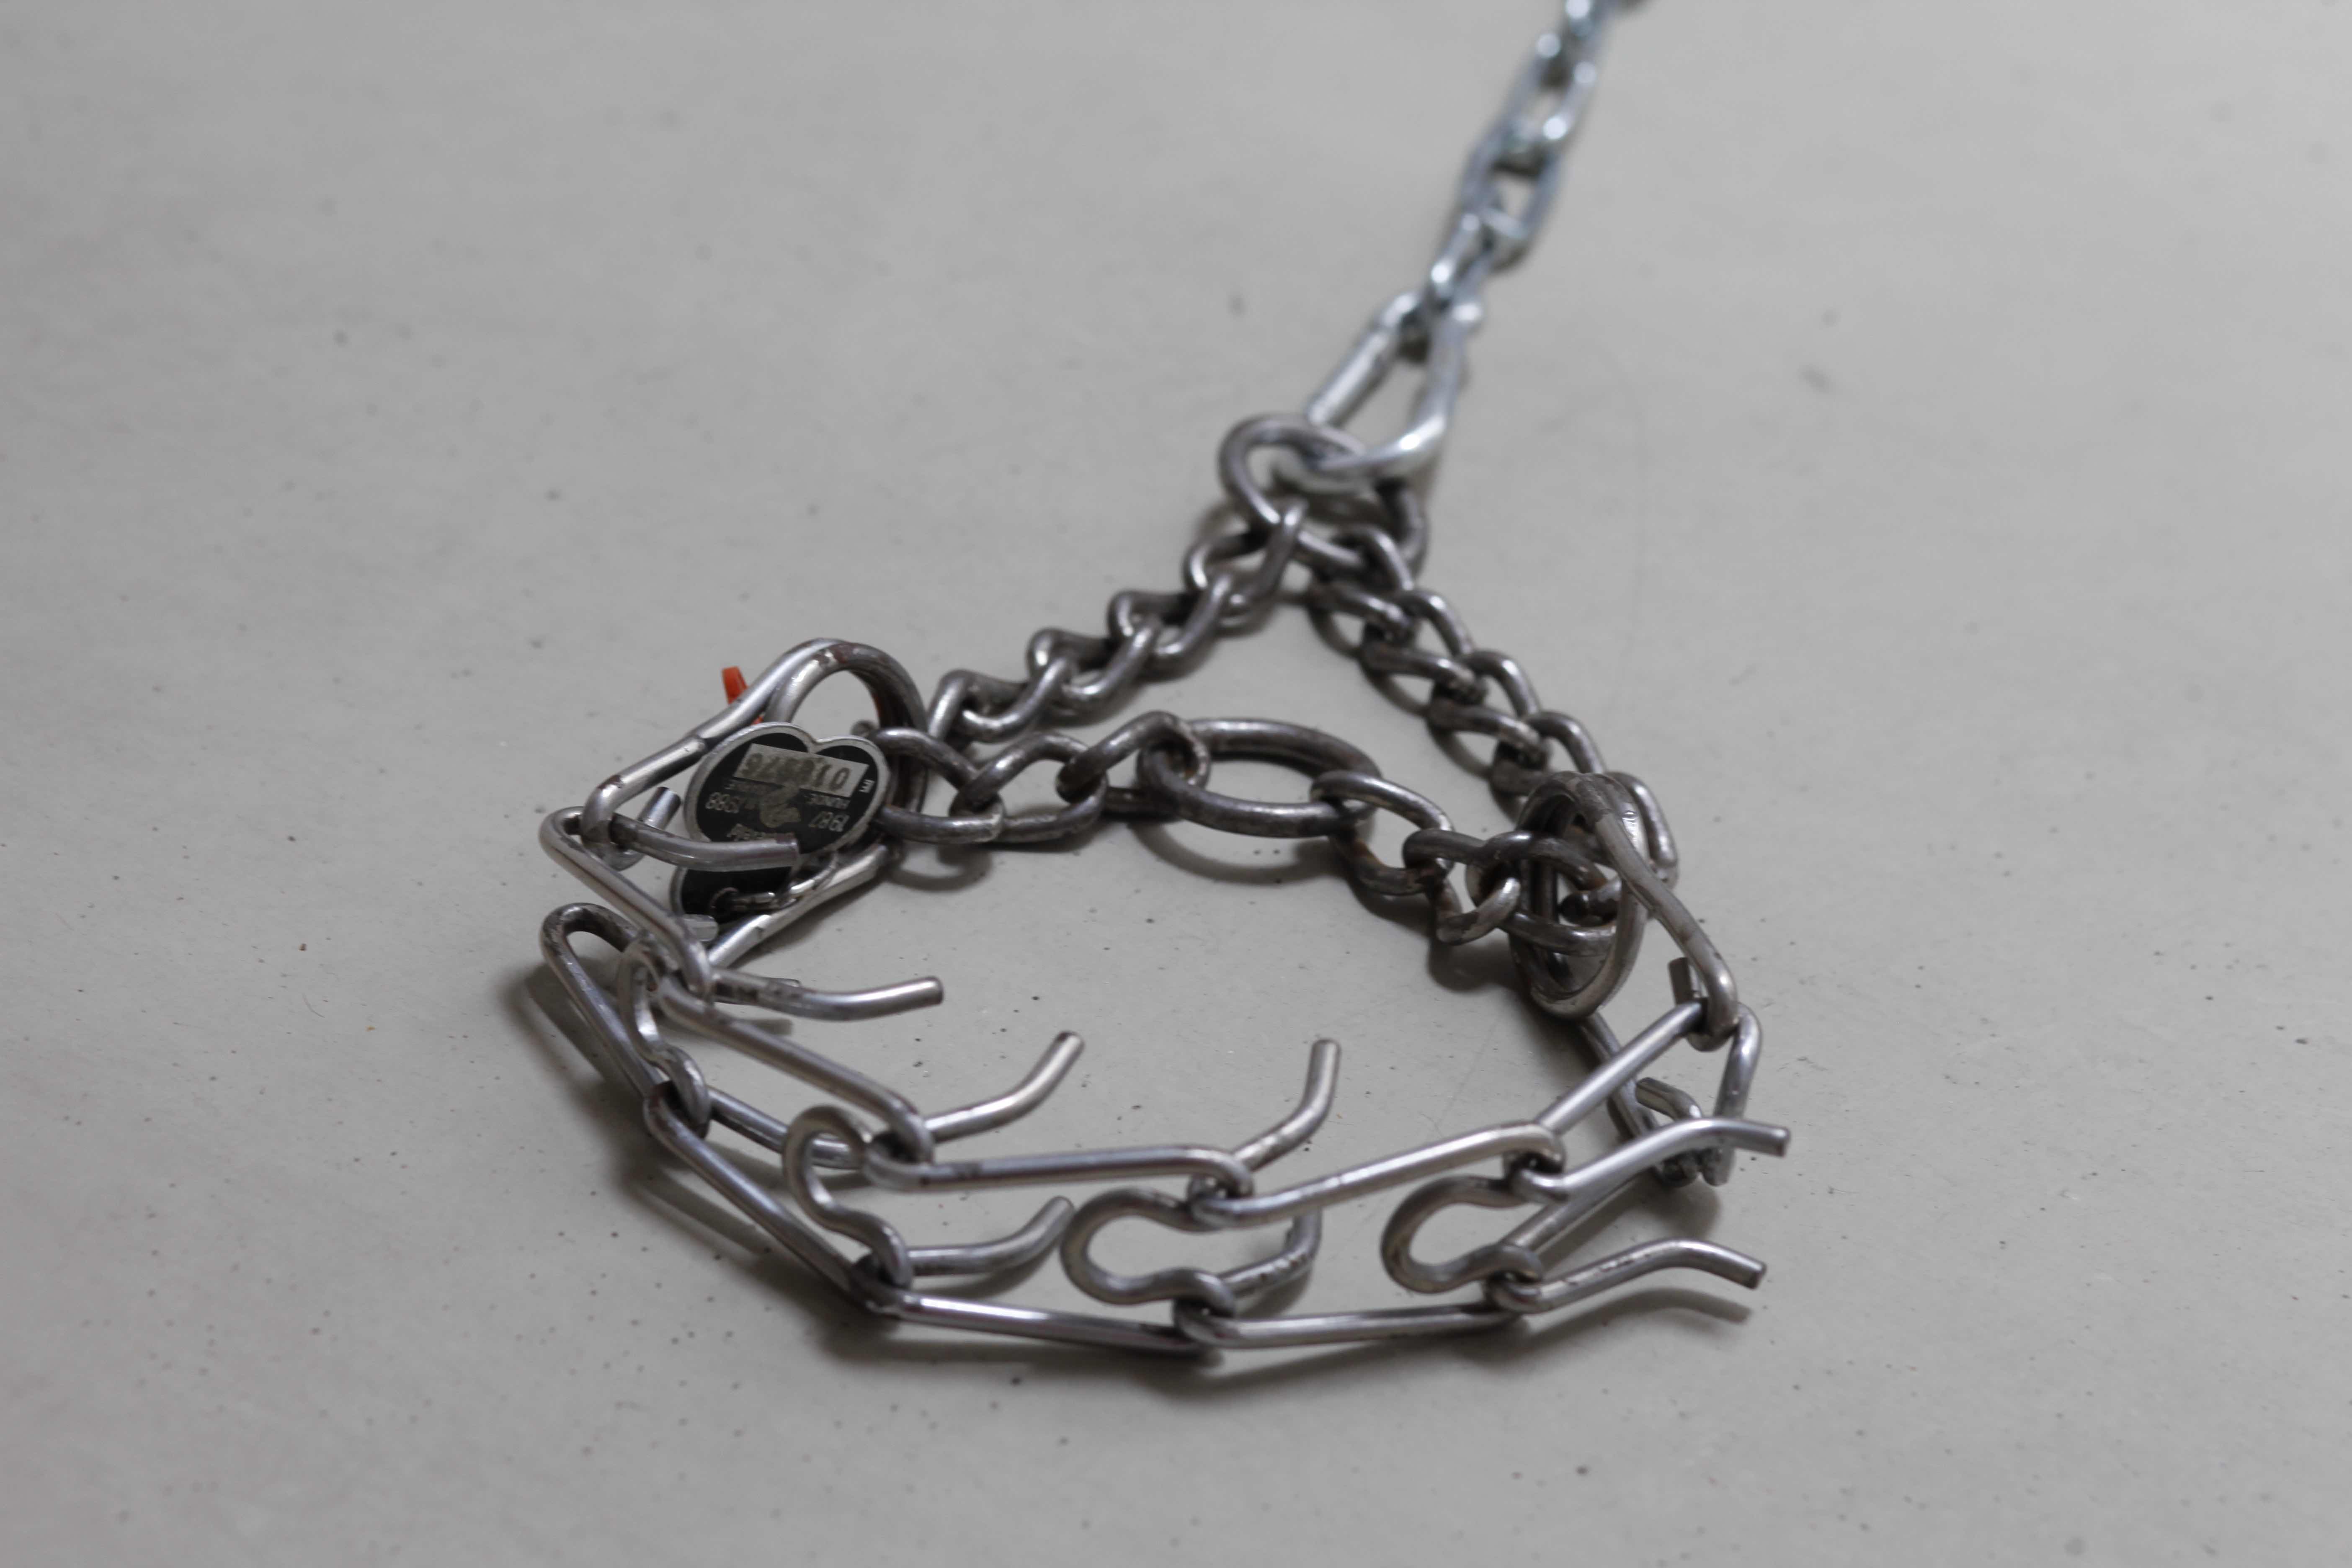 Sculpture. Prong Collar and Metal Chain.